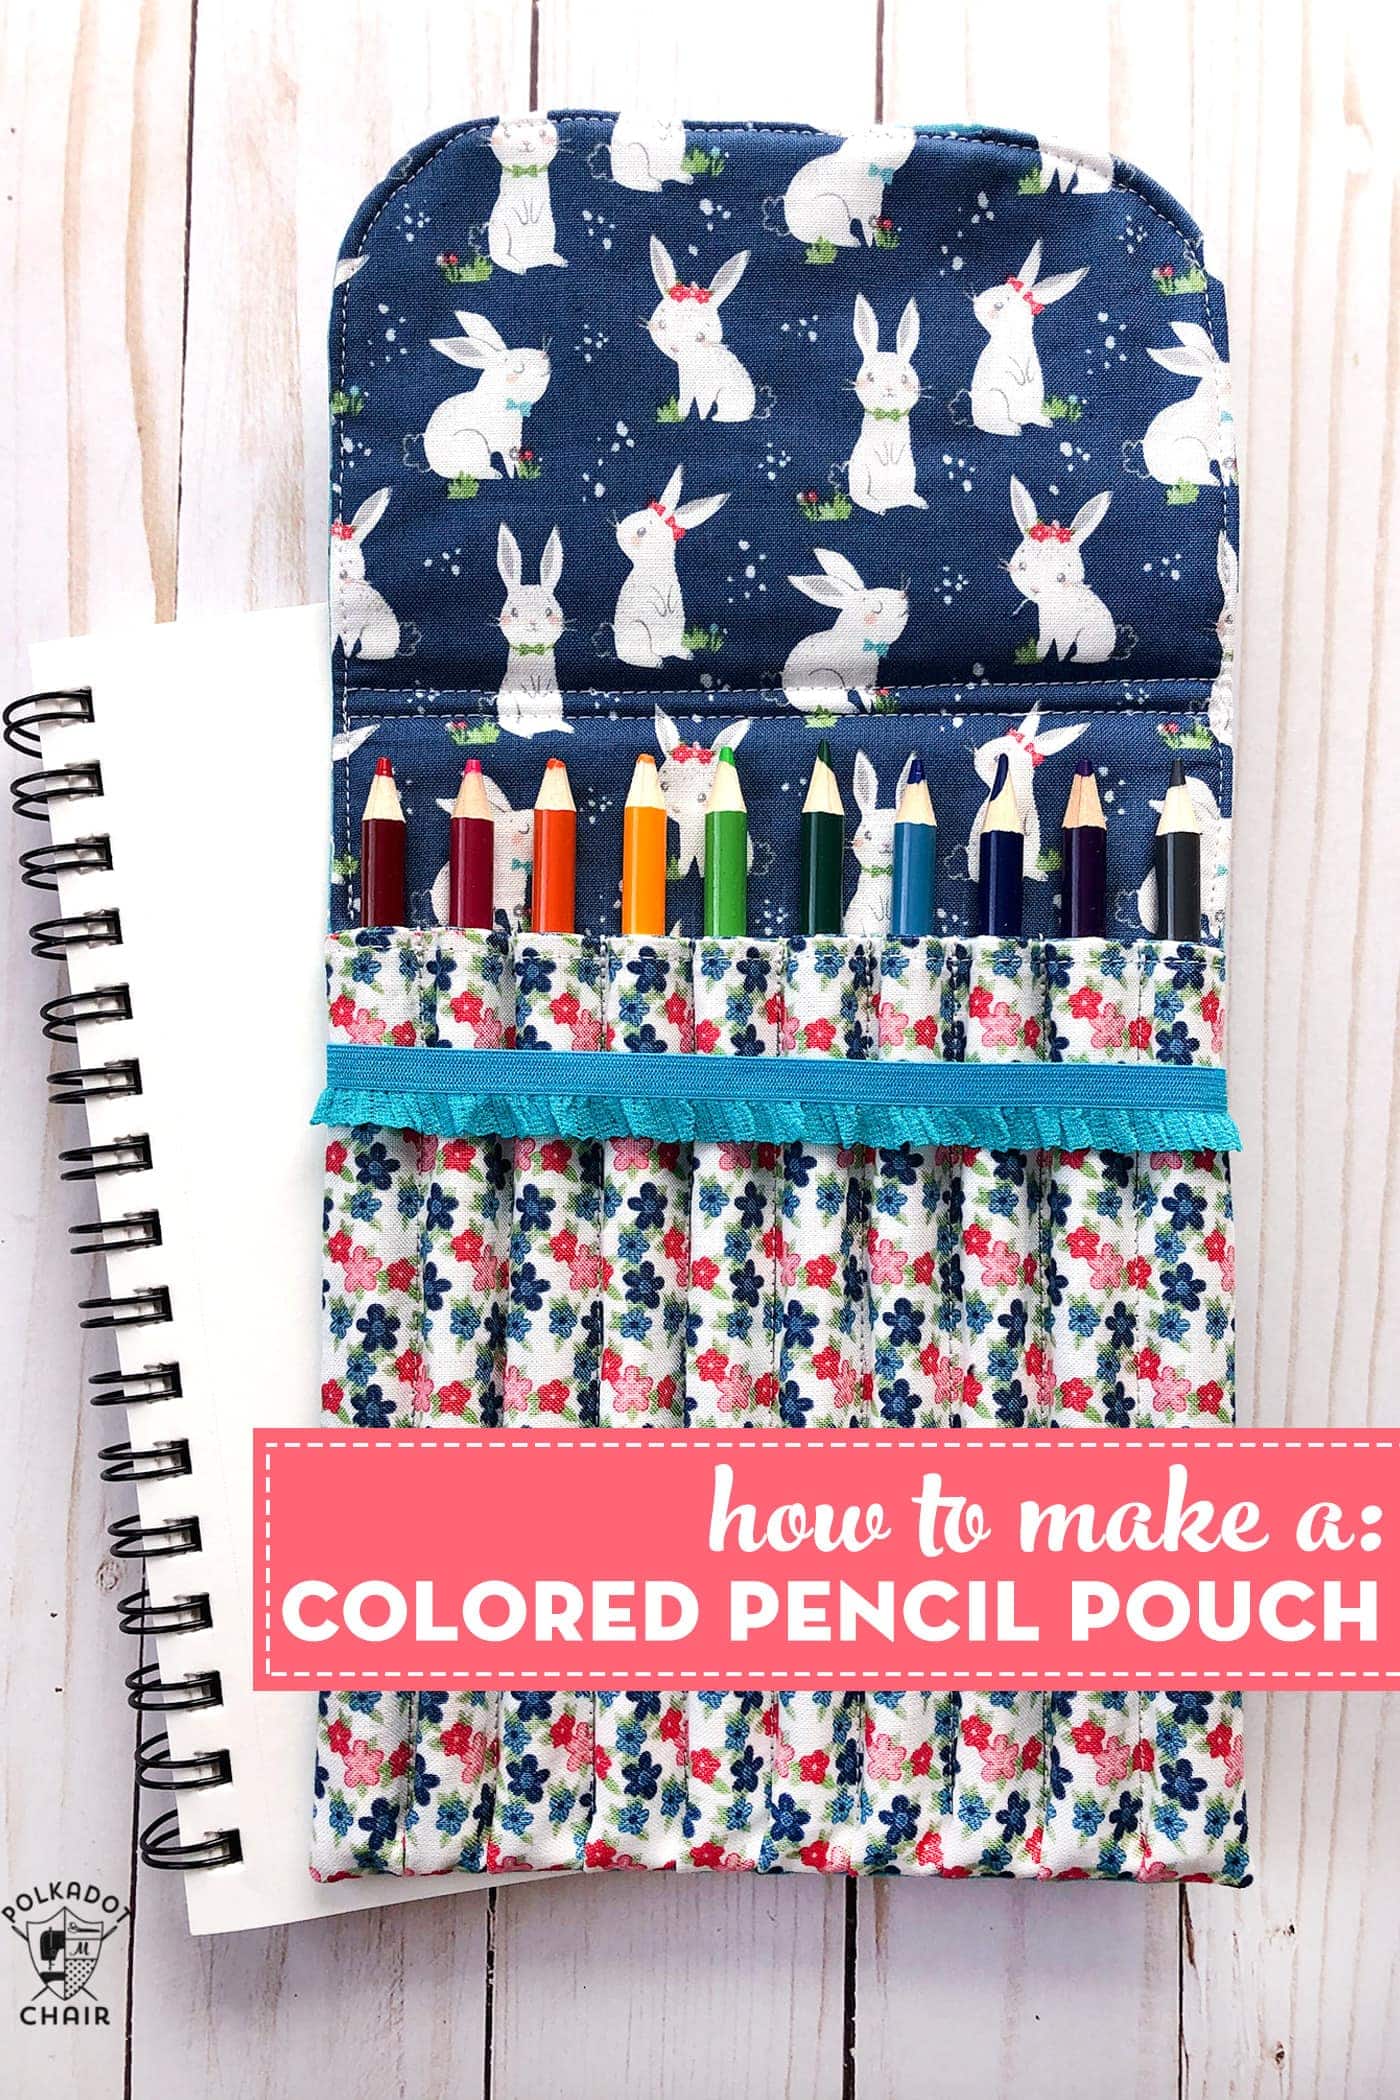 DIY Pencil Holder perfect for Colored Pencils